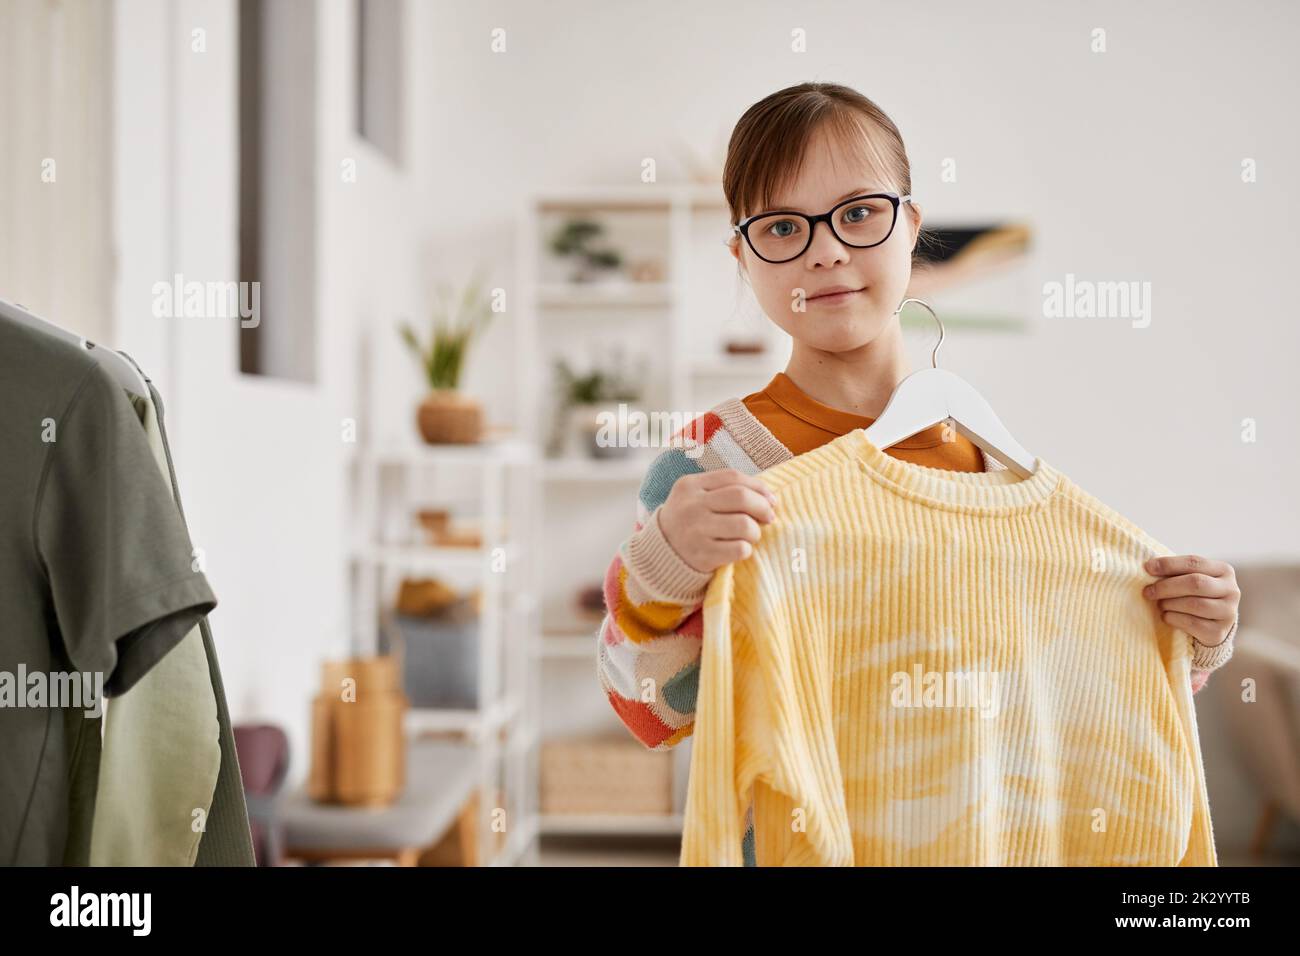 Waist up portrait of teenage girl with Down syndrome choosing clothes and looking at camera, copy space Stock Photo